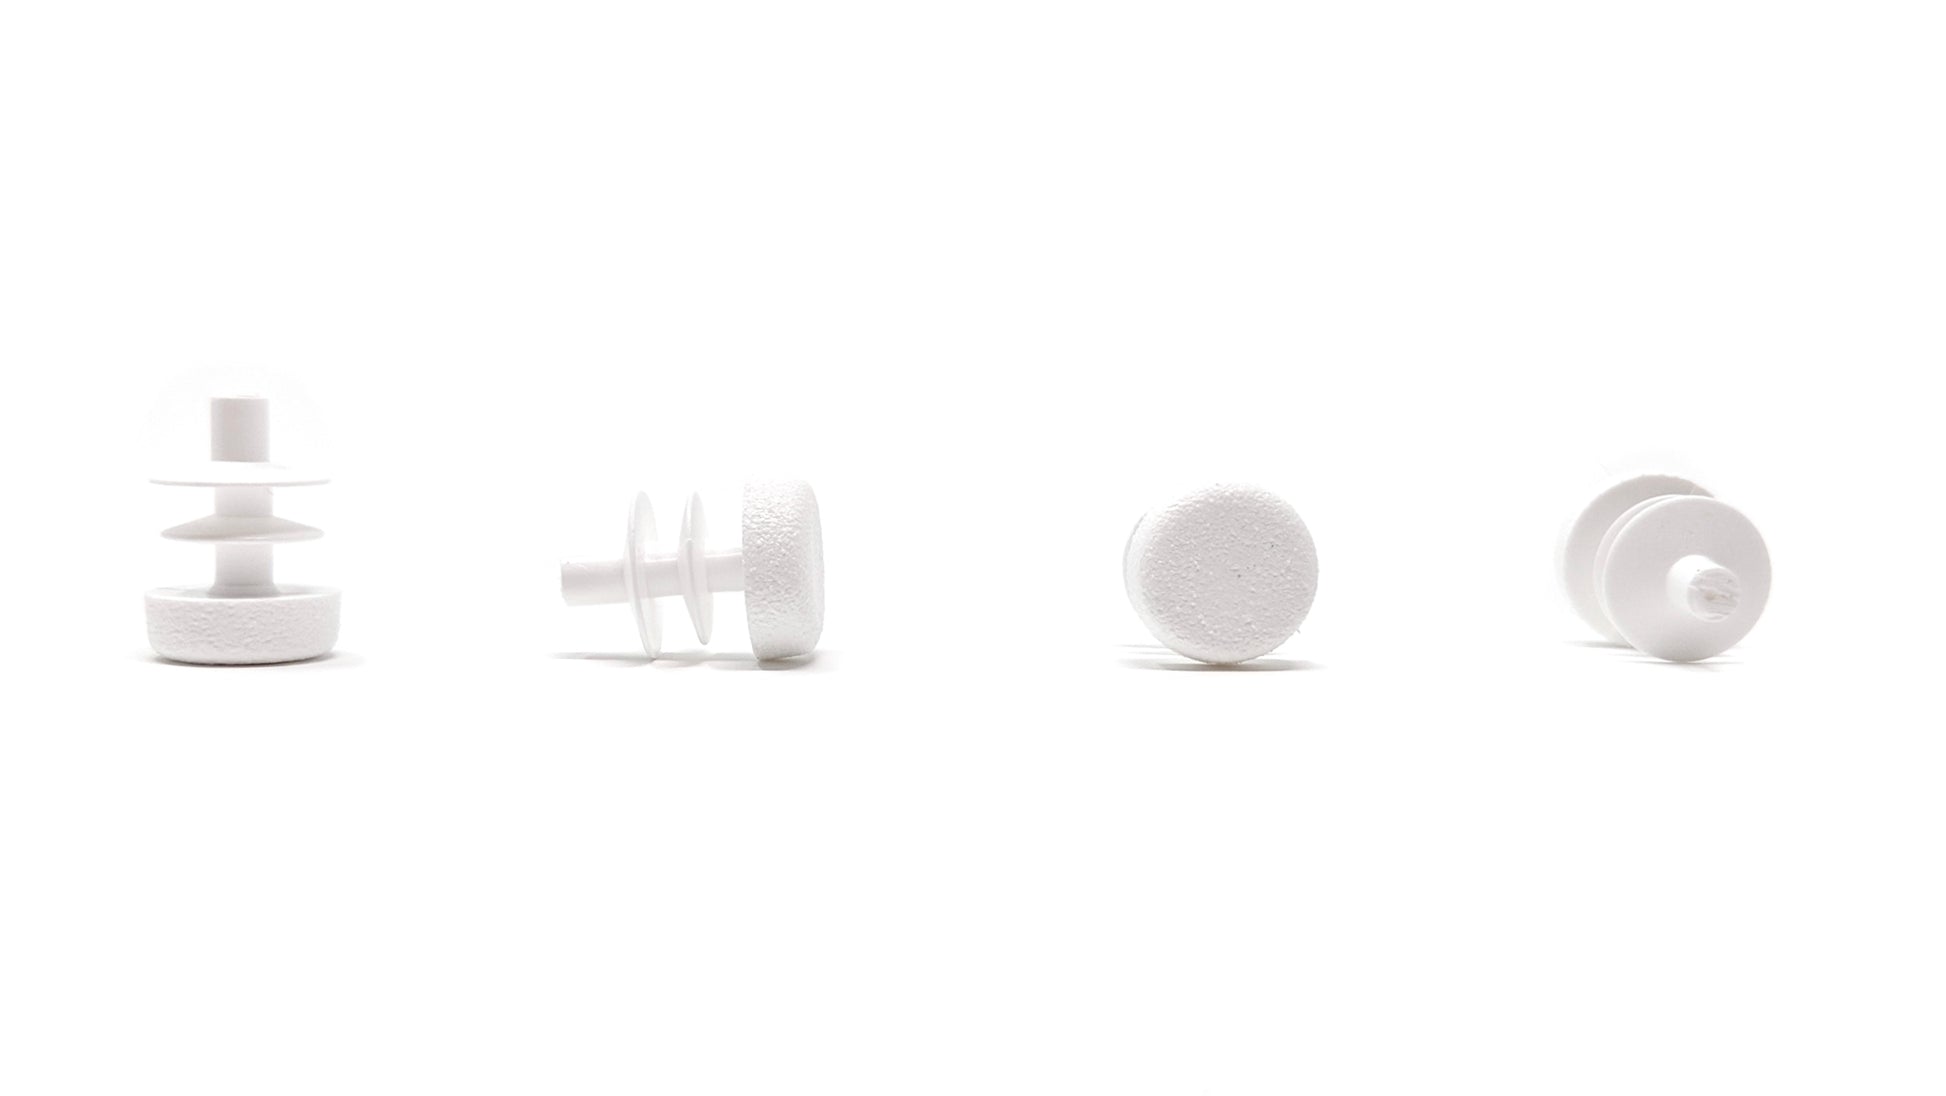 Round Tube Inserts 10mm White | Made in Germany | Keay Vital Parts - Keay Vital Parts